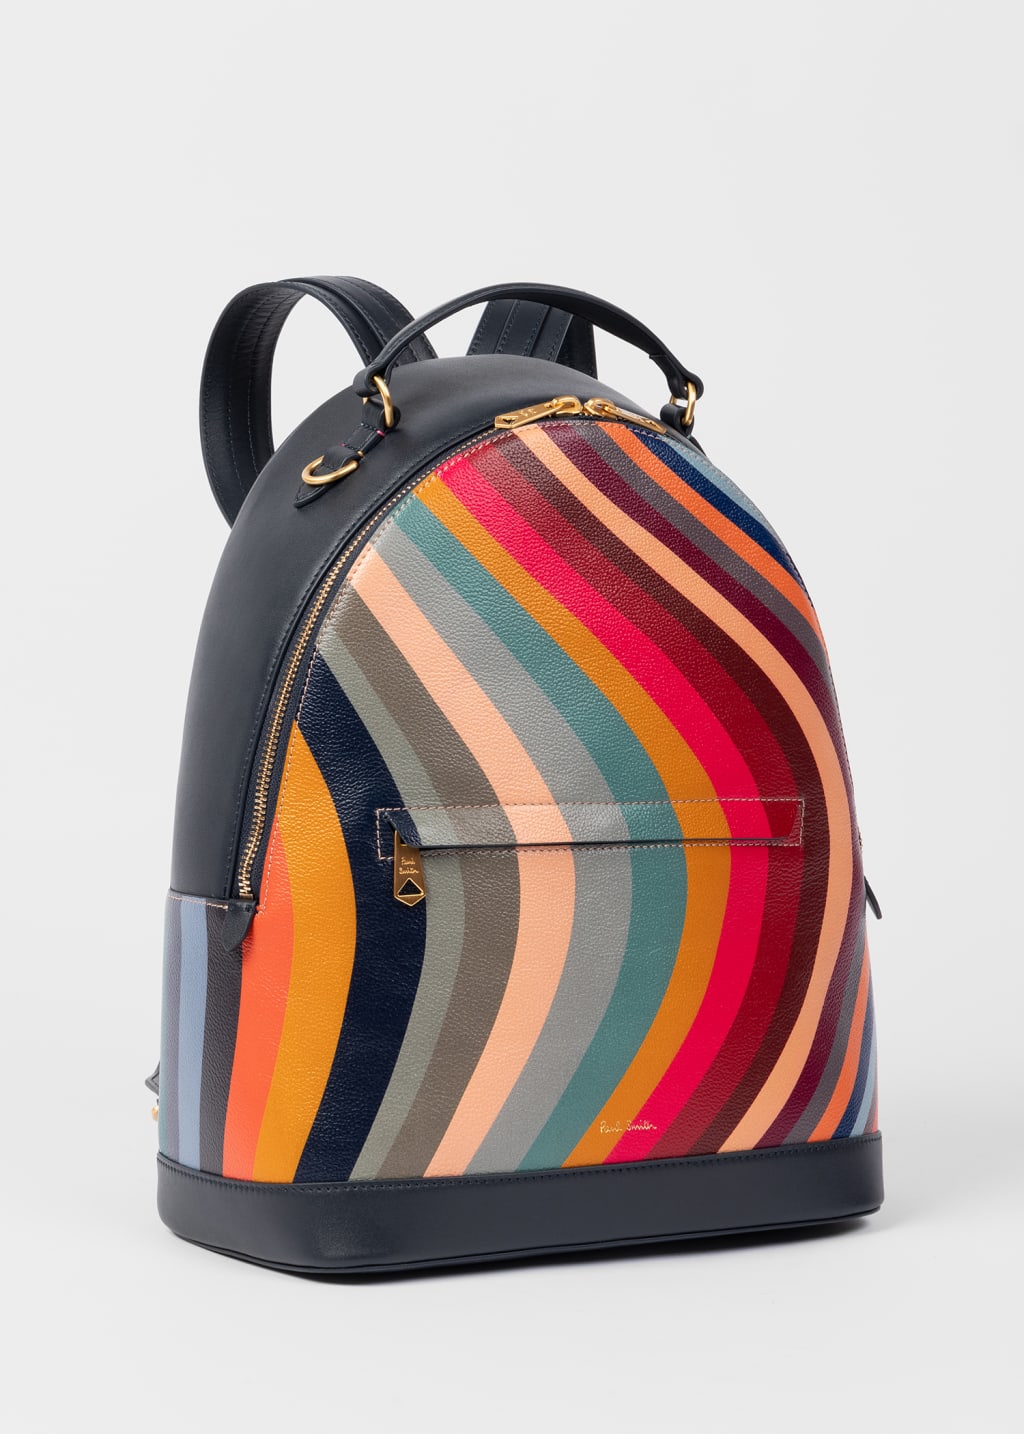 Product View - Women's 'Swirl' Leather Backpack by Paul Smith